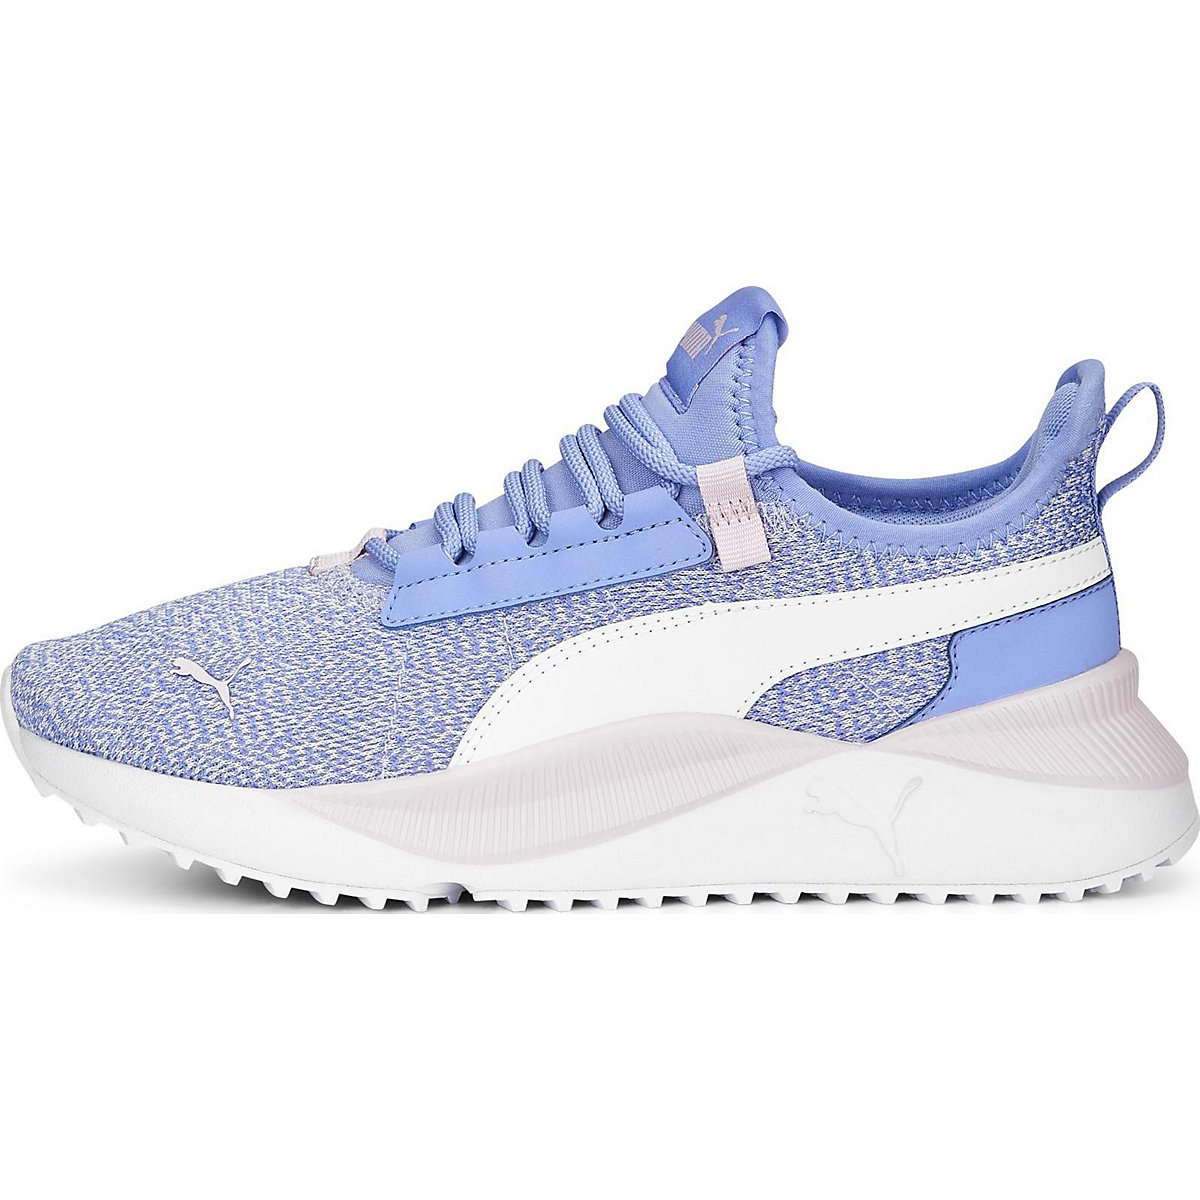 PUMA Kinder Sneakers Low PACER EASY STREET lila